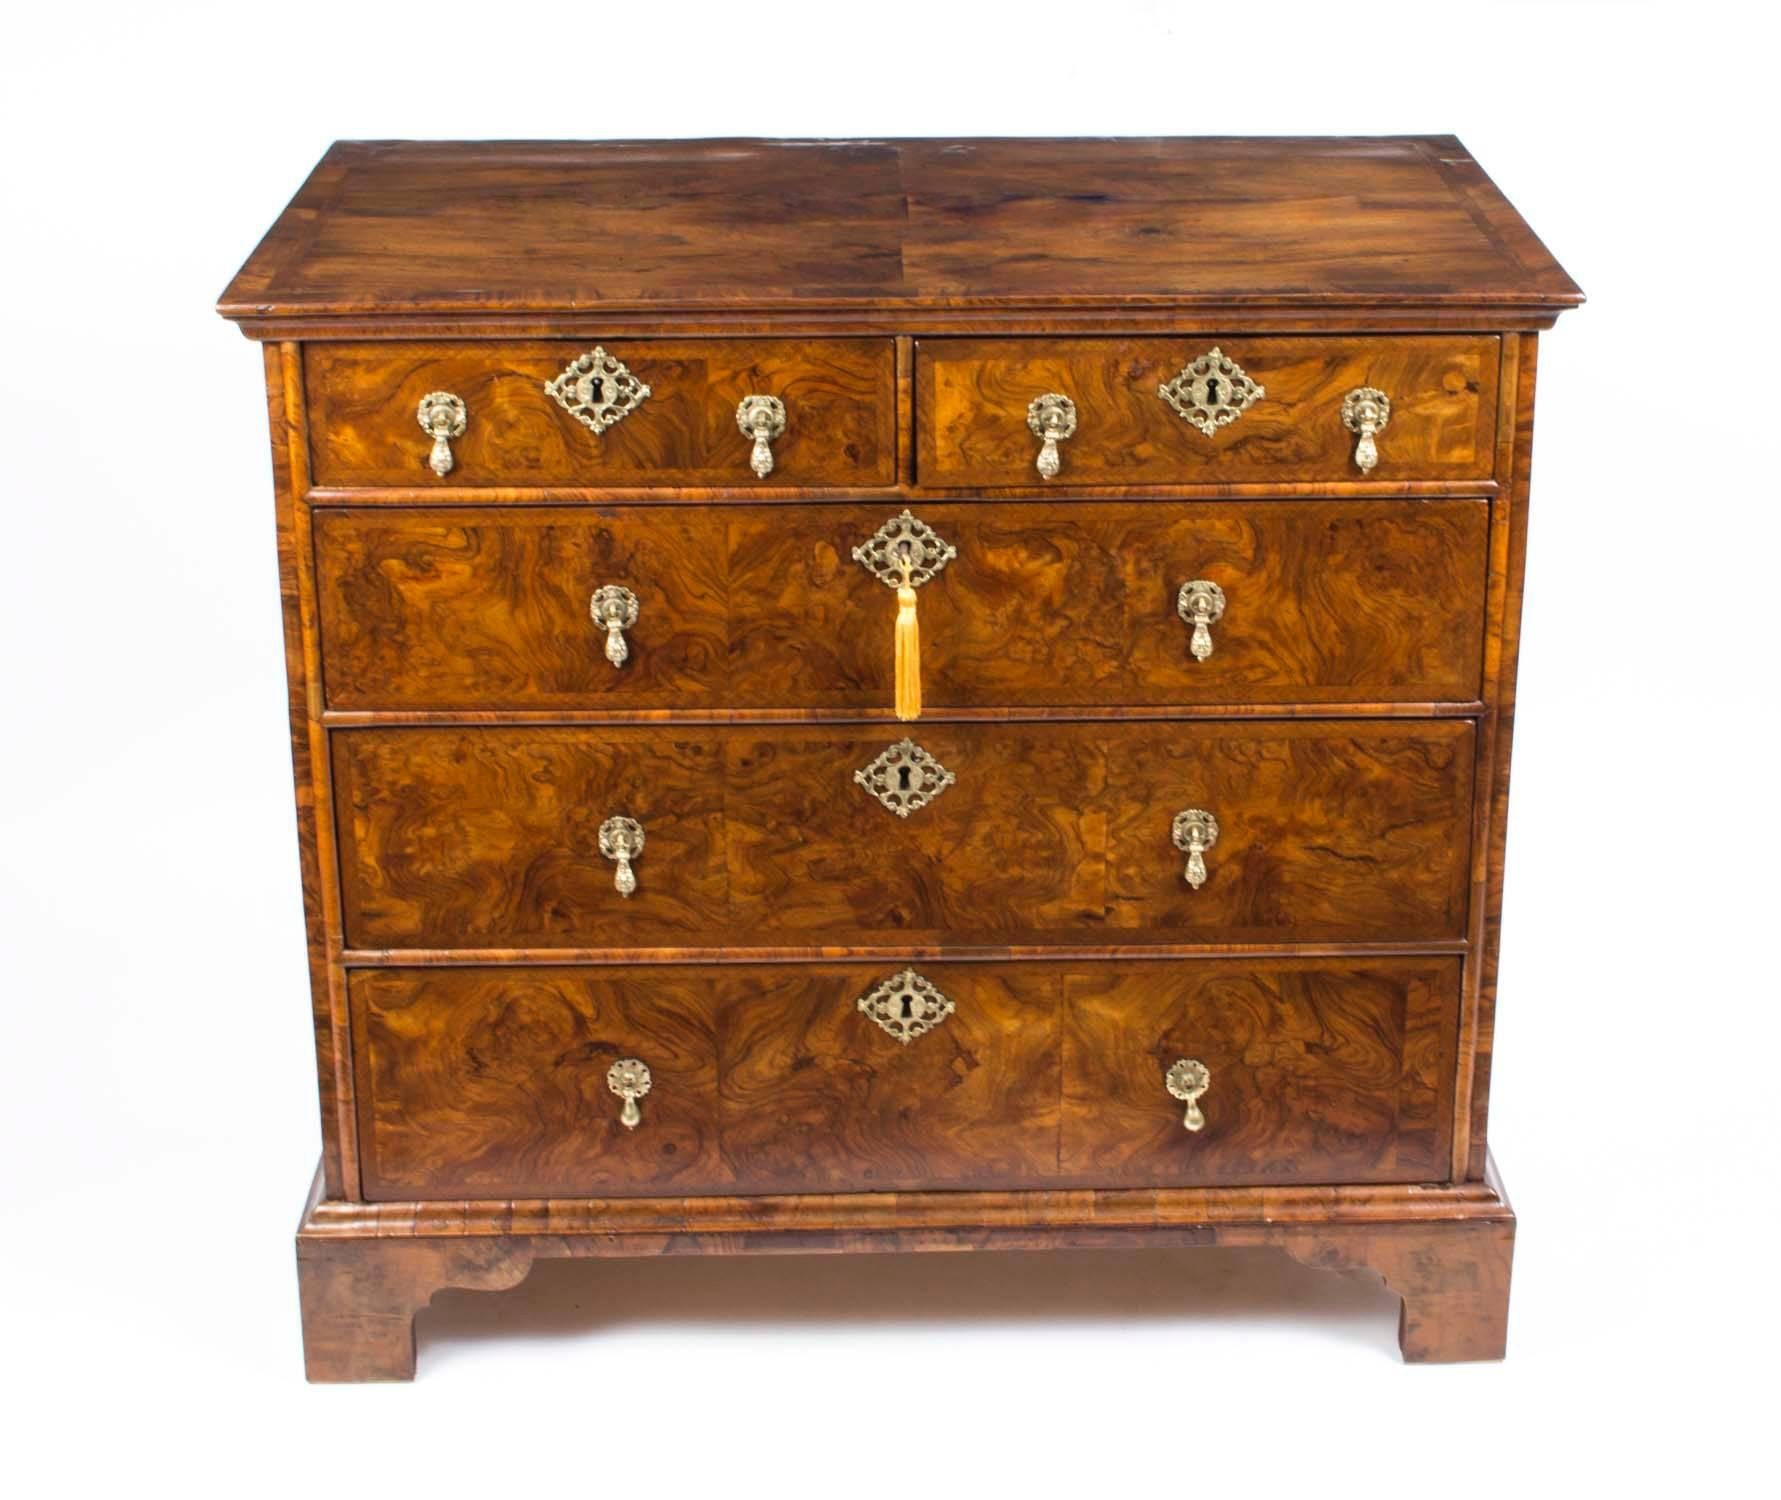 This is a stunning antique Queen Anne walnut chest of drawers, circa 1730 in date.

It has two short drawers above three full width drawers and they are all oak lined. The top and the drawer fronts have beautiful herringbone crossbanded decoration